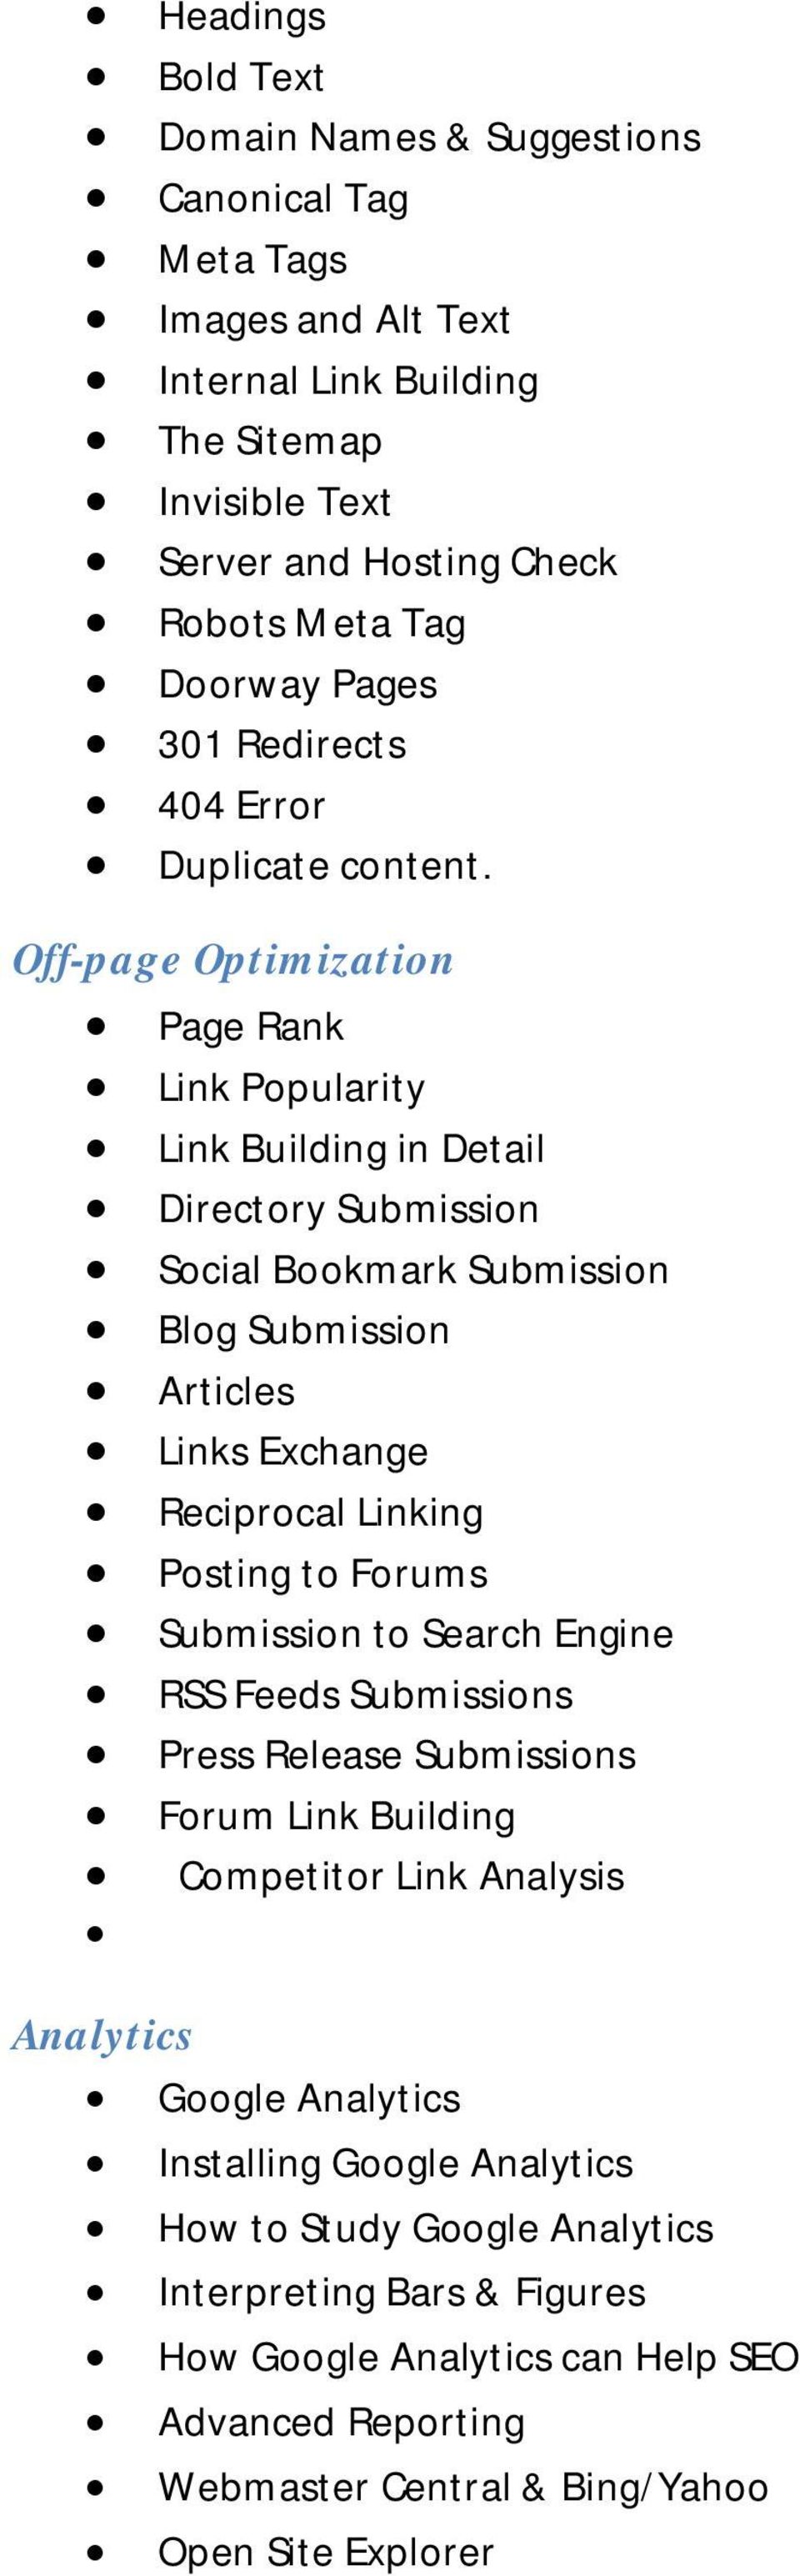 Off-page Optimization Page Rank Link Popularity Link Building in Detail Directory Submission Social Bookmark Submission Blog Submission Articles Links Exchange Reciprocal Linking Posting to